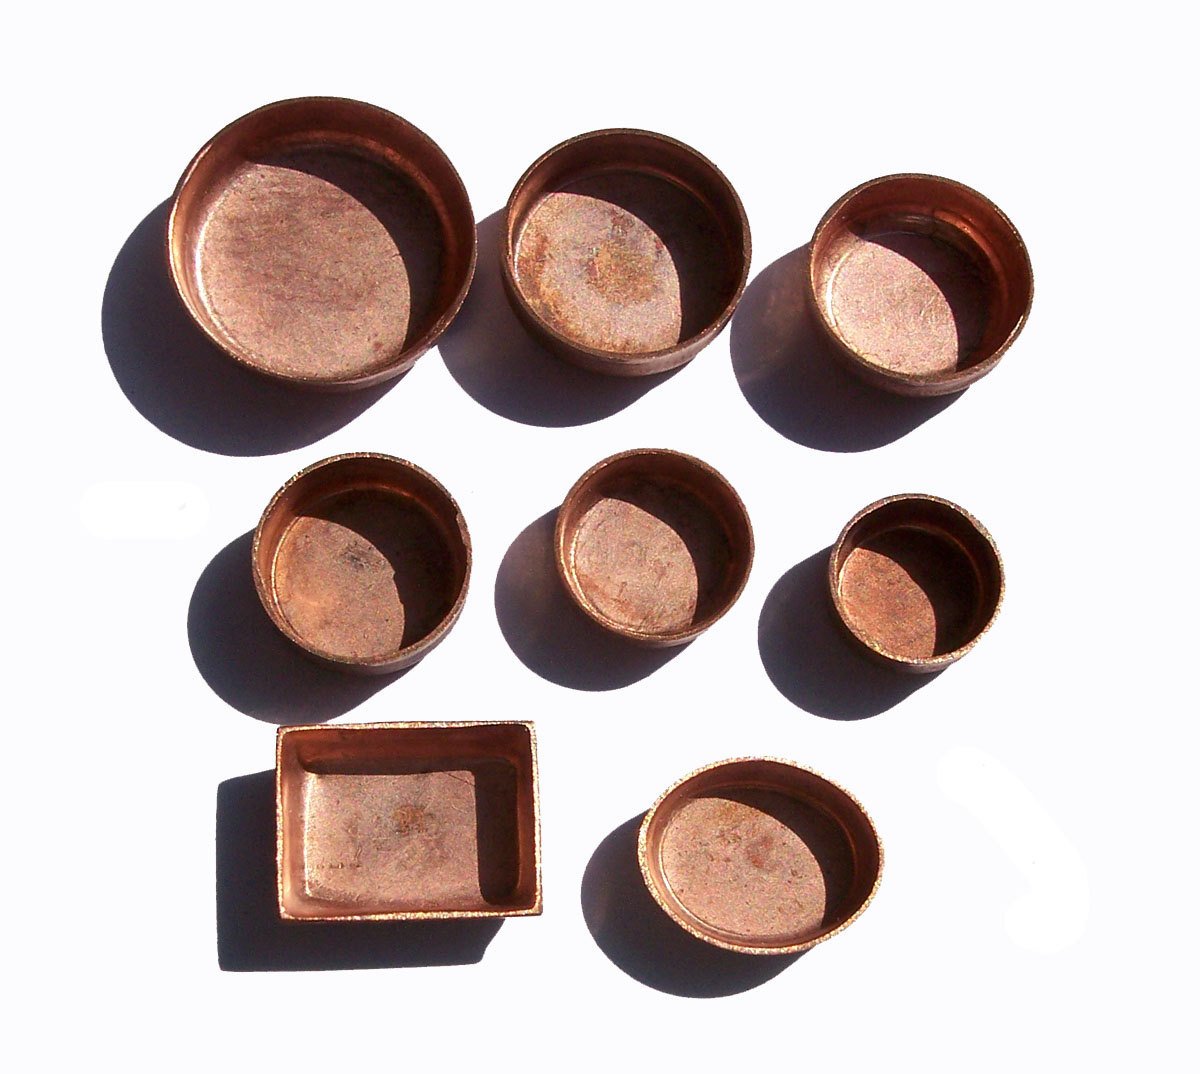 Bezel Cups Copper Ovals Blanks - 26g - 10mm x 8mm Outside Dimension, 2.9mm tall for Enameling - 6 pieces